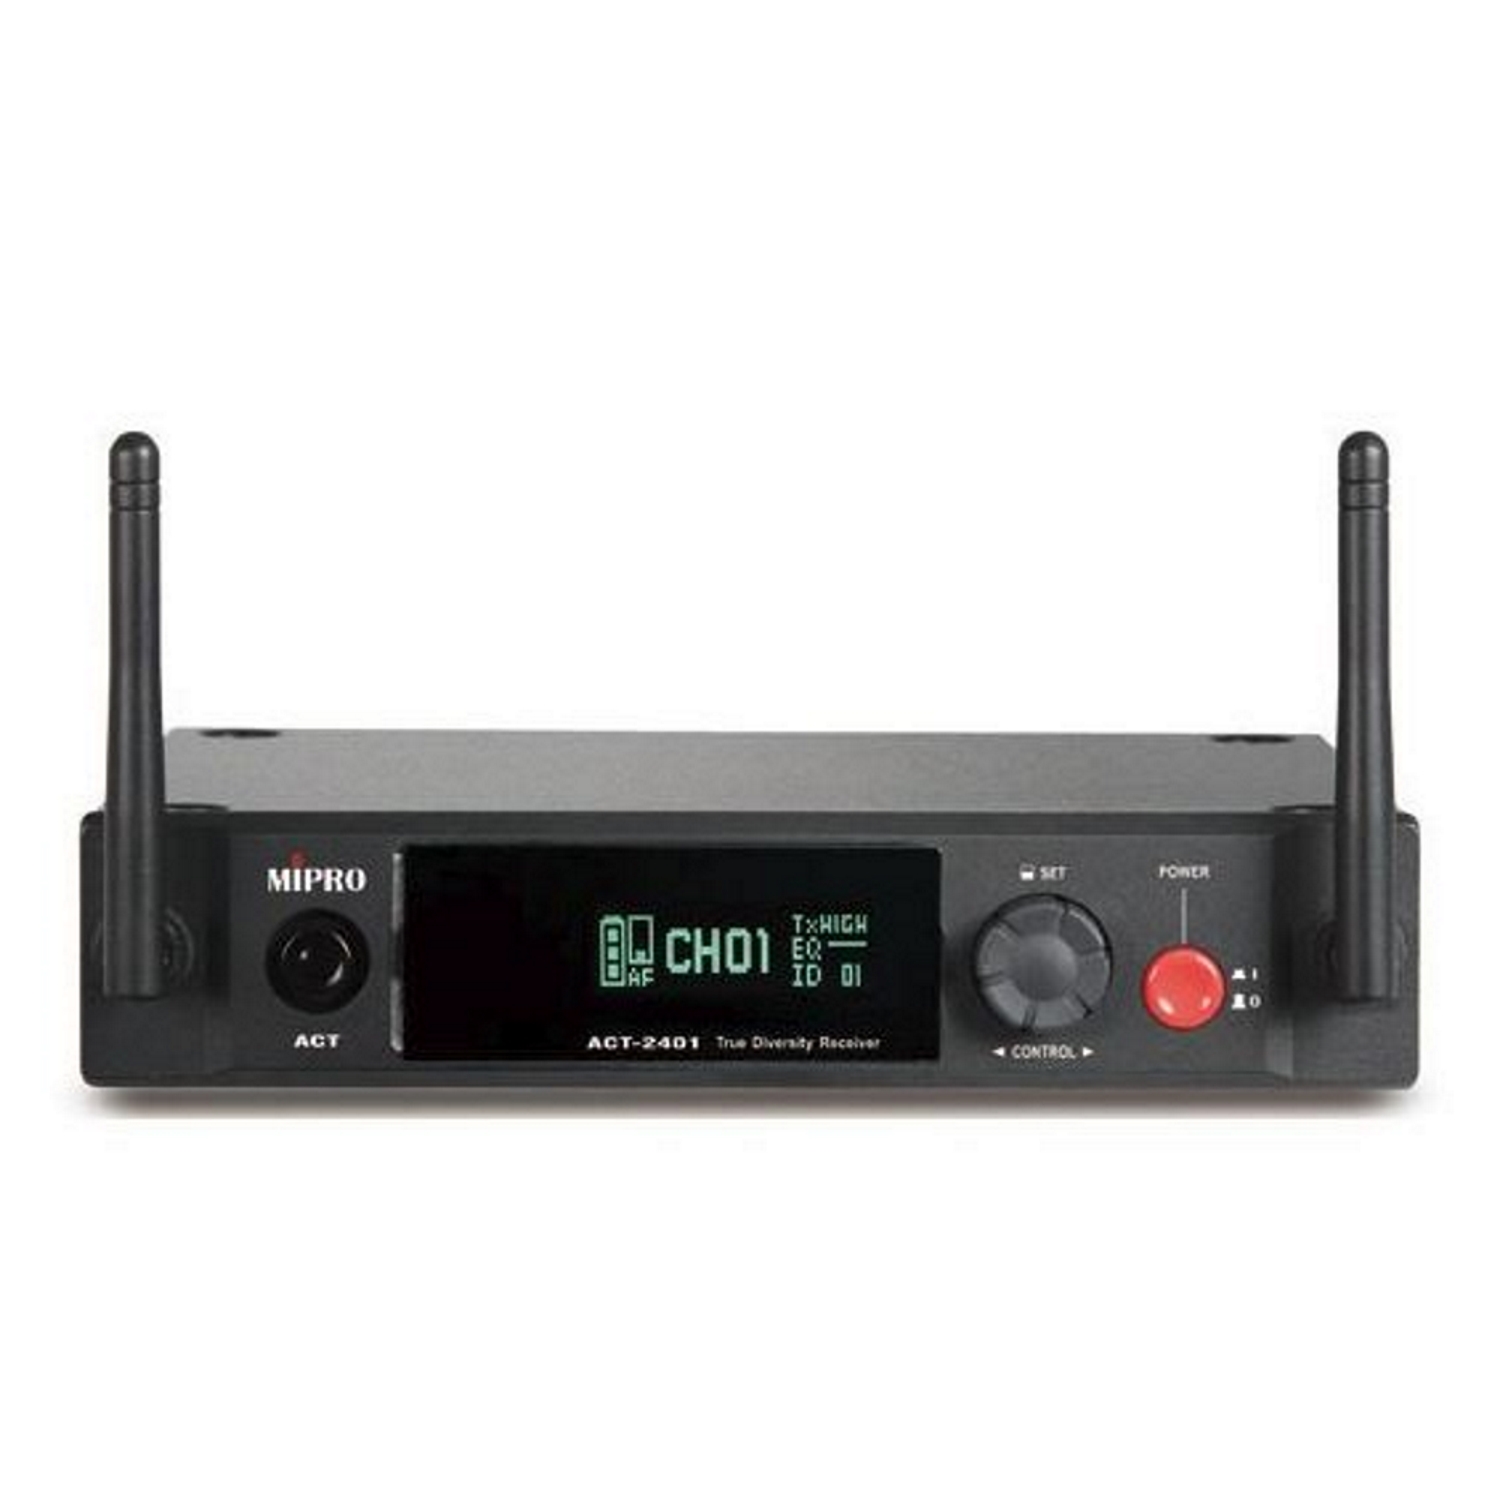 Single-channel receiver ACT-2401